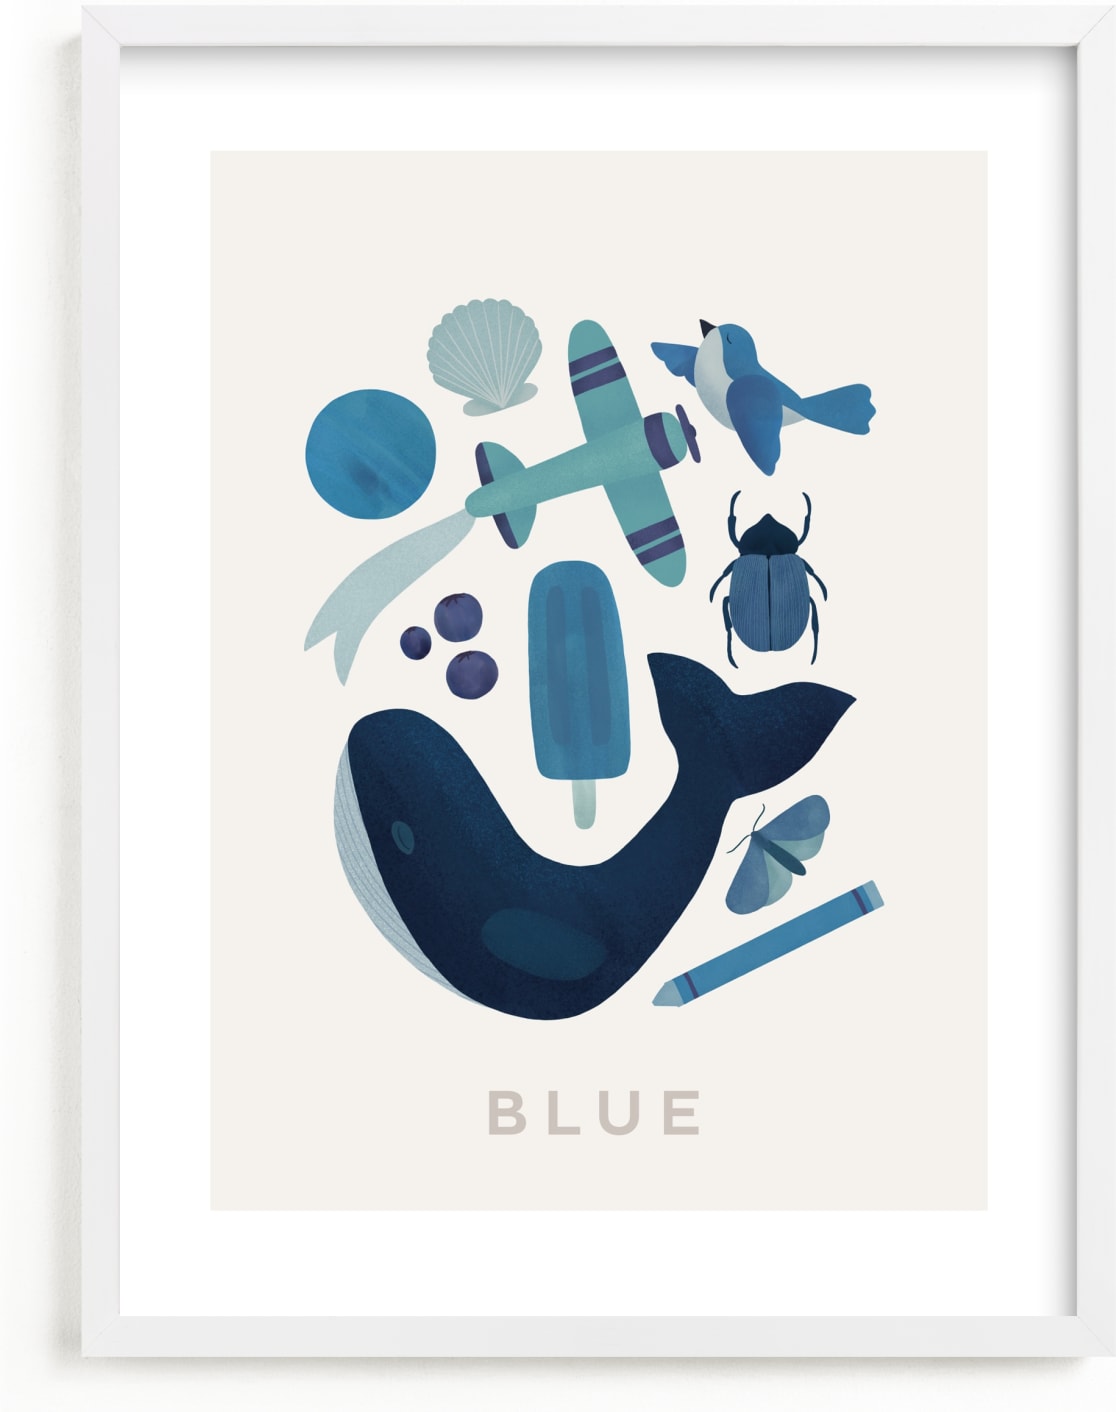 This is a blue kids wall art by Ana Peake called Ten Blue Things.